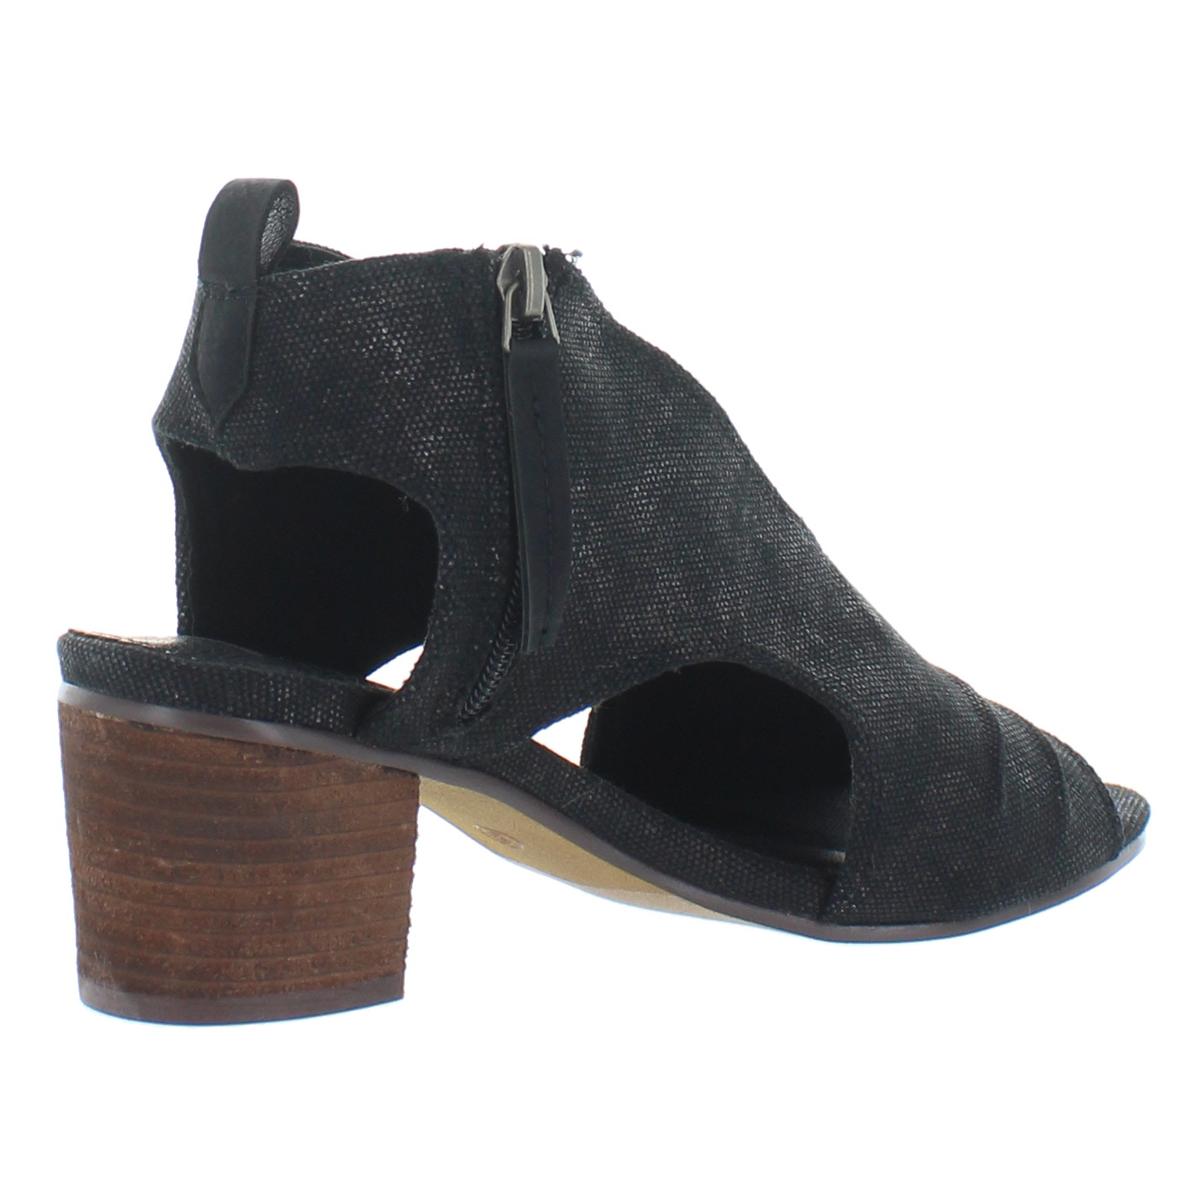 Very G Womens Sissy Open Toe Block Heel Booties Ankle Boots Shoes BHFO 1421